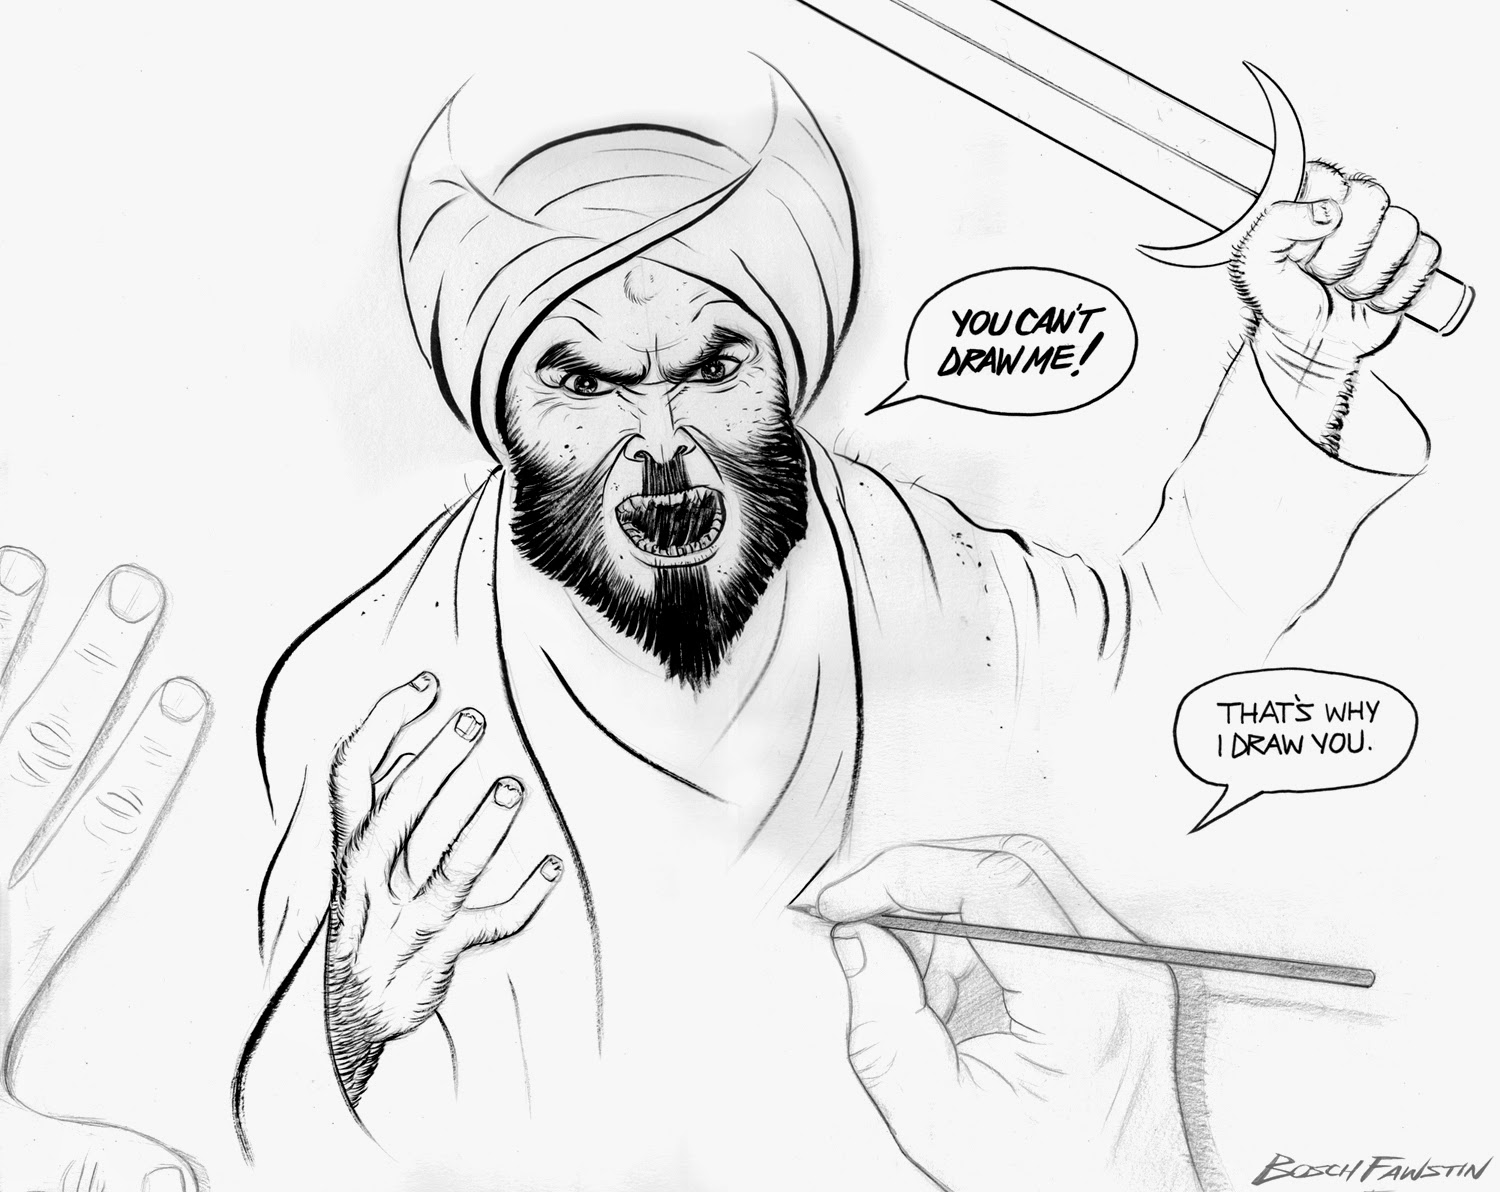 Mohammad-Contest-Drawing-1-small.jpg